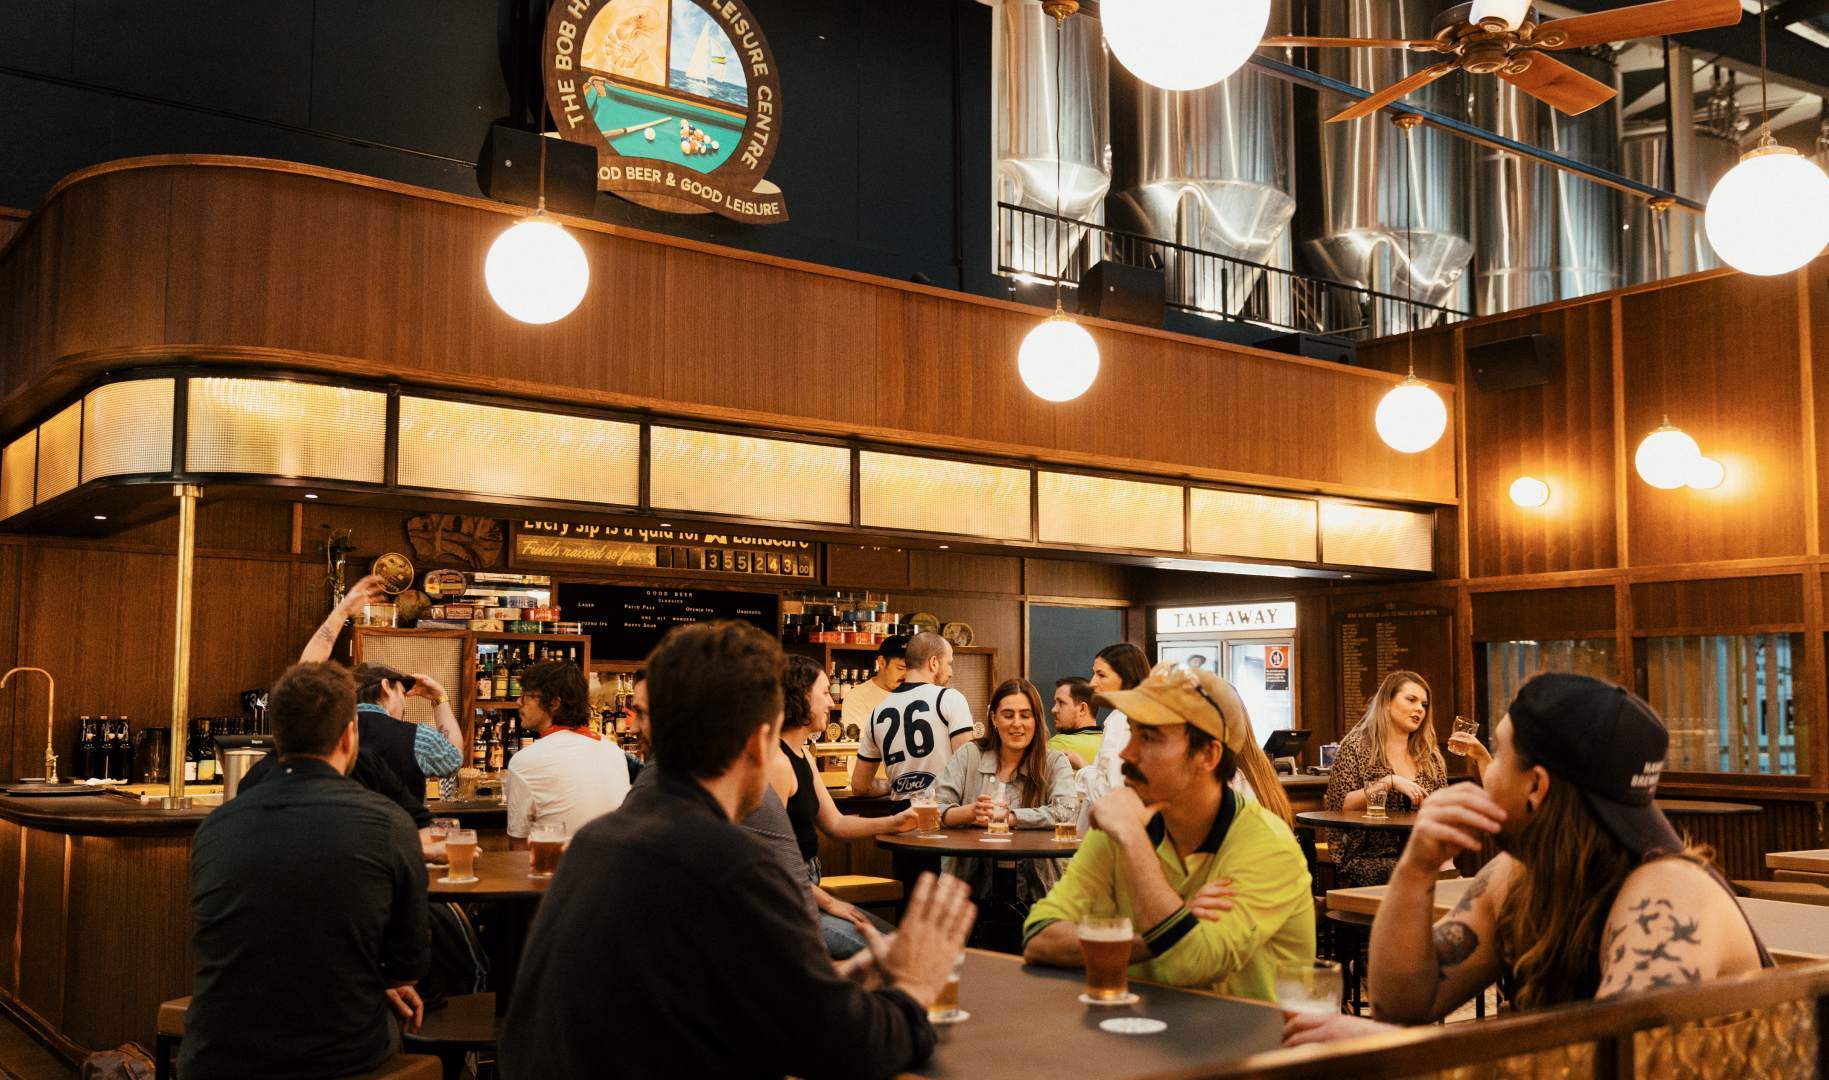 The Bob Hawke Beer & Leisure Centre - the best Sydney brewery bar.